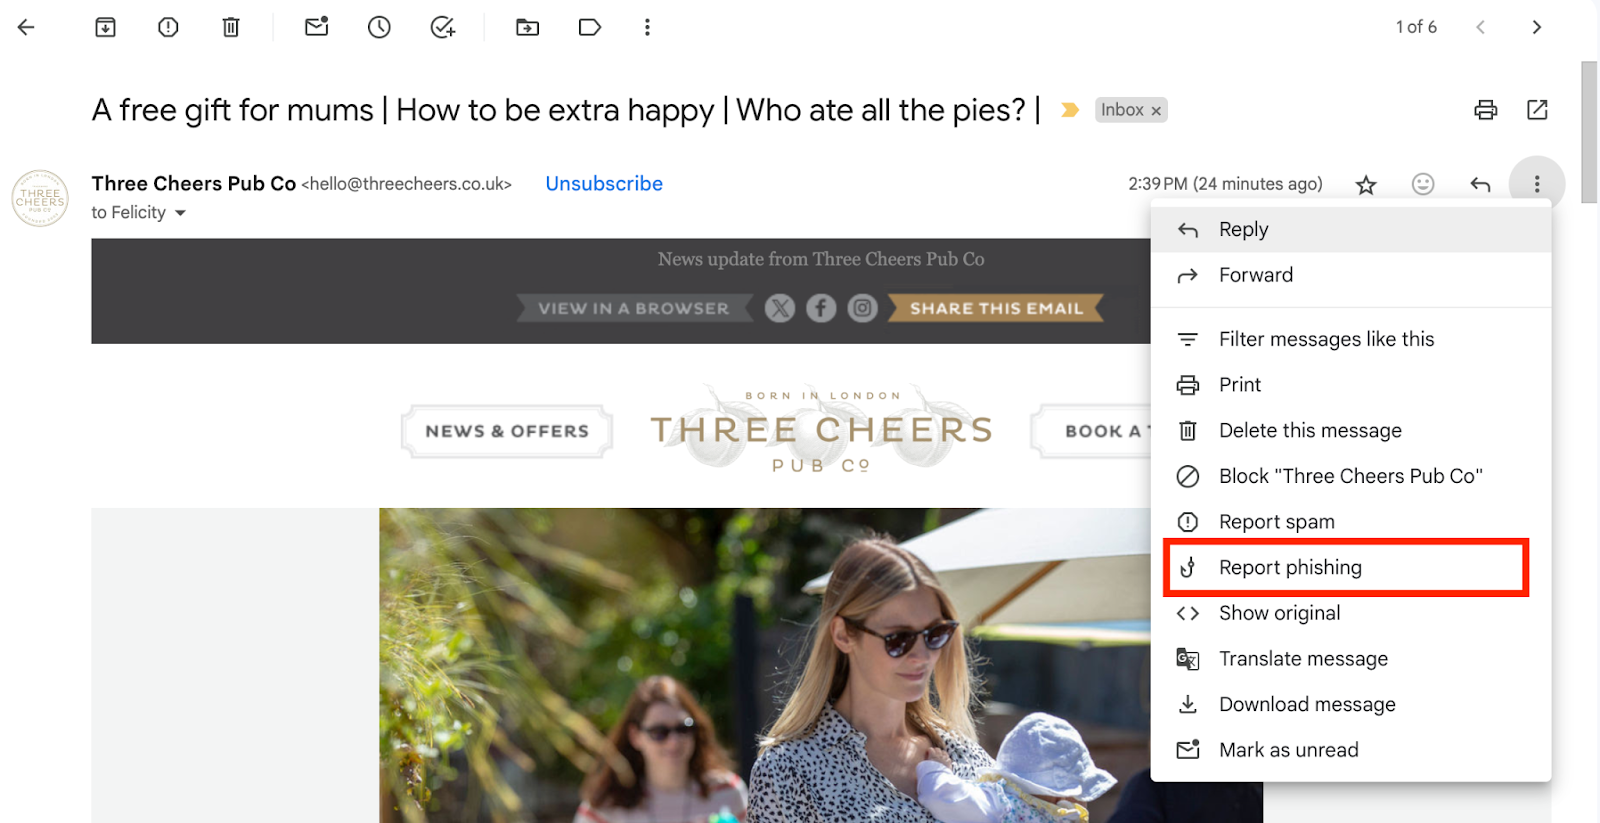 How To Unsubscribe From An Email Without Opening It